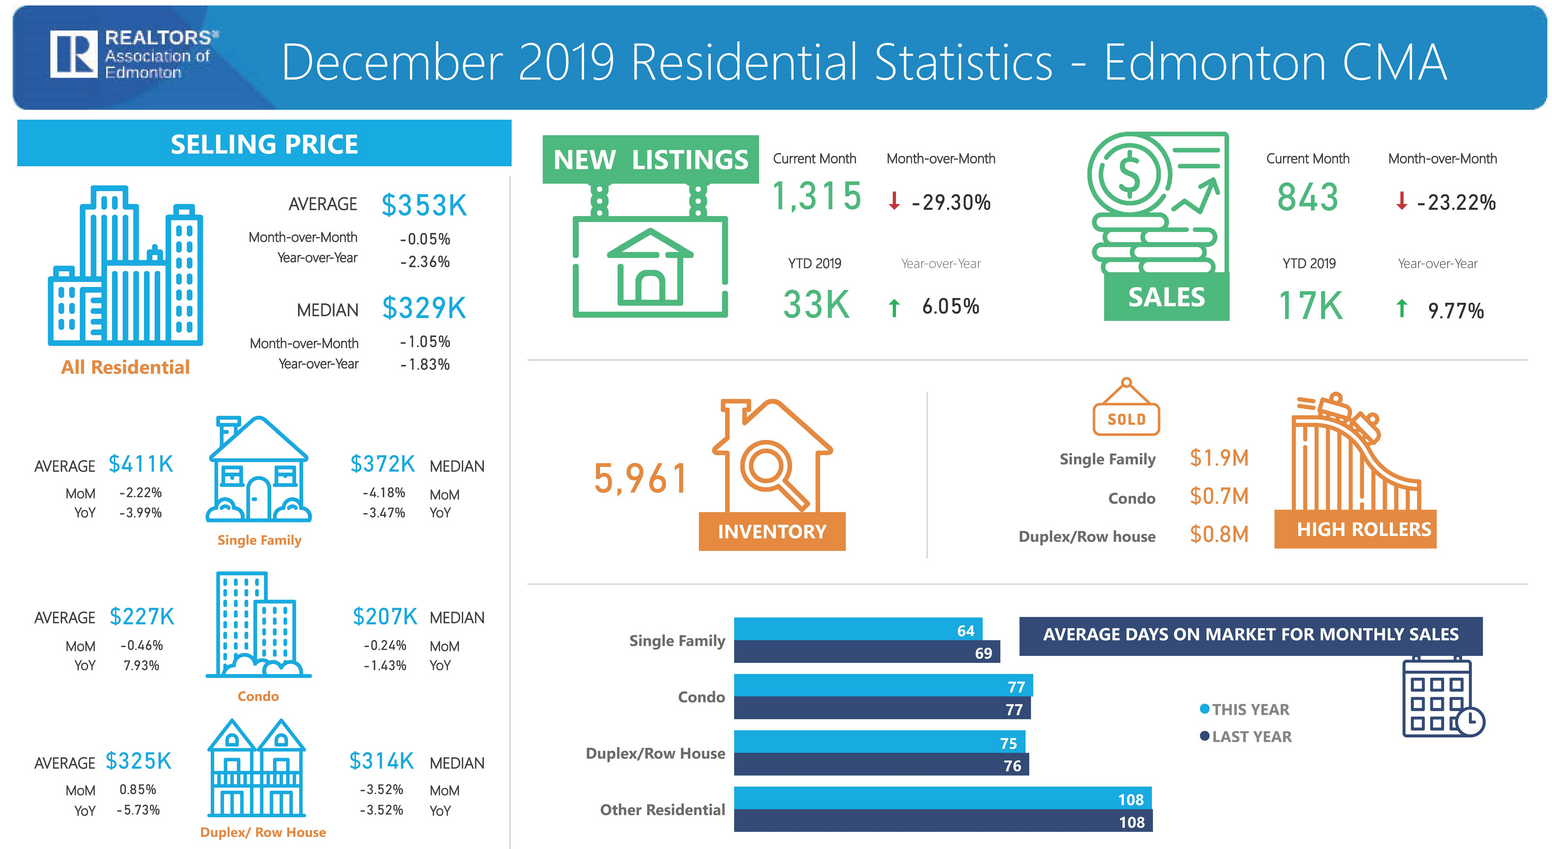 real estate data for all residential properties sold and for sale in Edmonton from January of 2012 to December of 2019